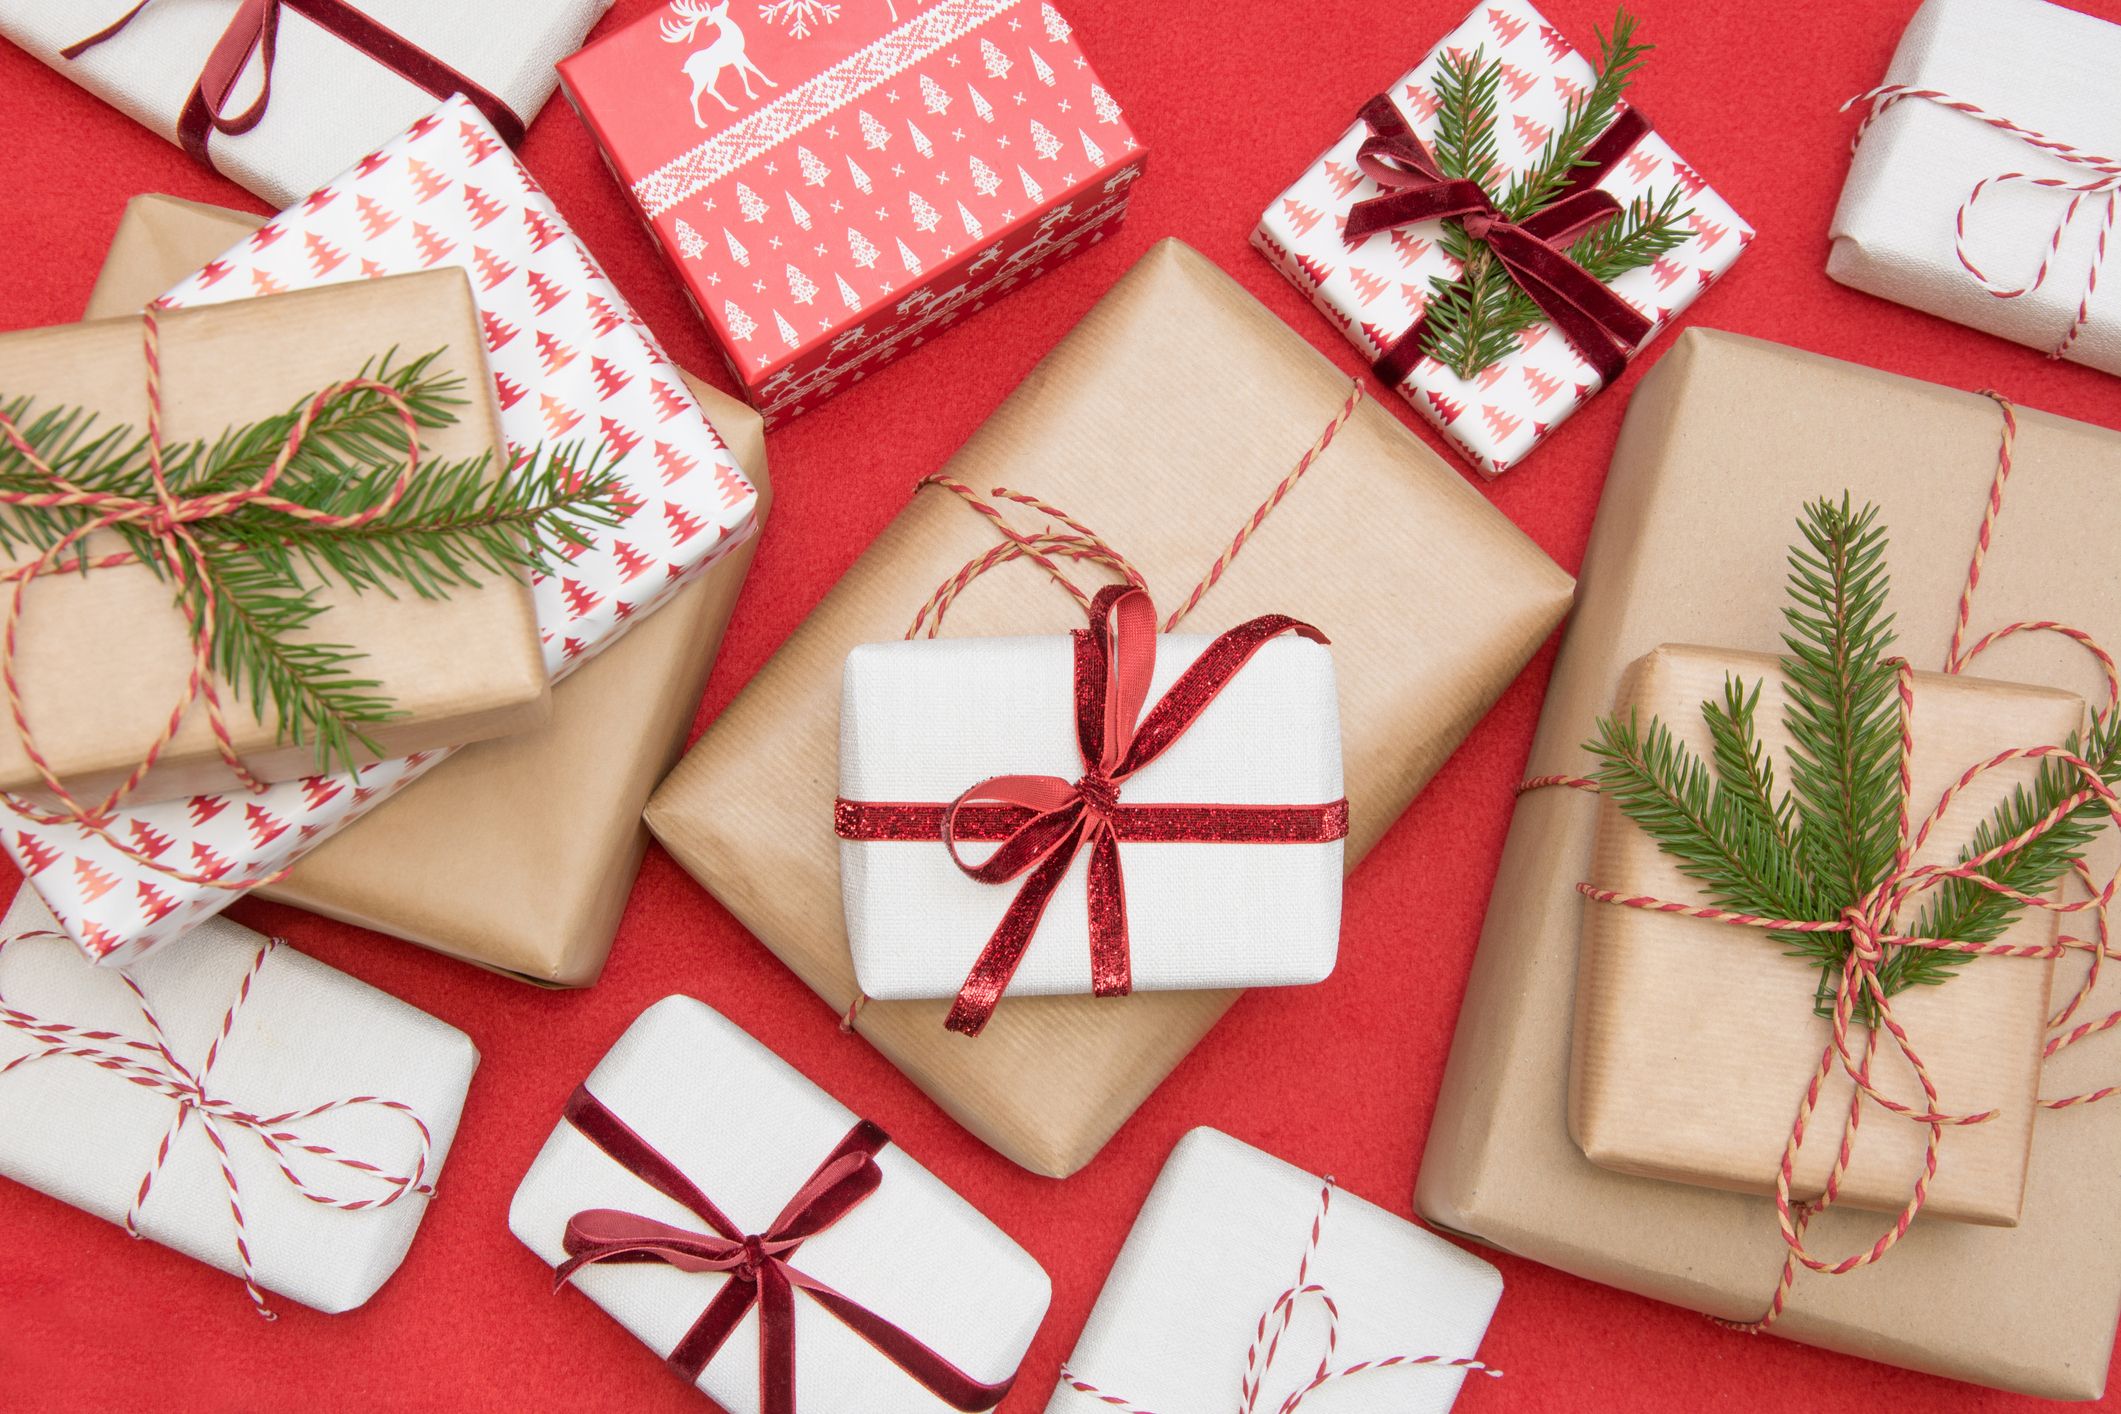 https://hips.hearstapps.com/hmg-prod/images/best-christmas-wrapping-ideas-1044172350.jpg